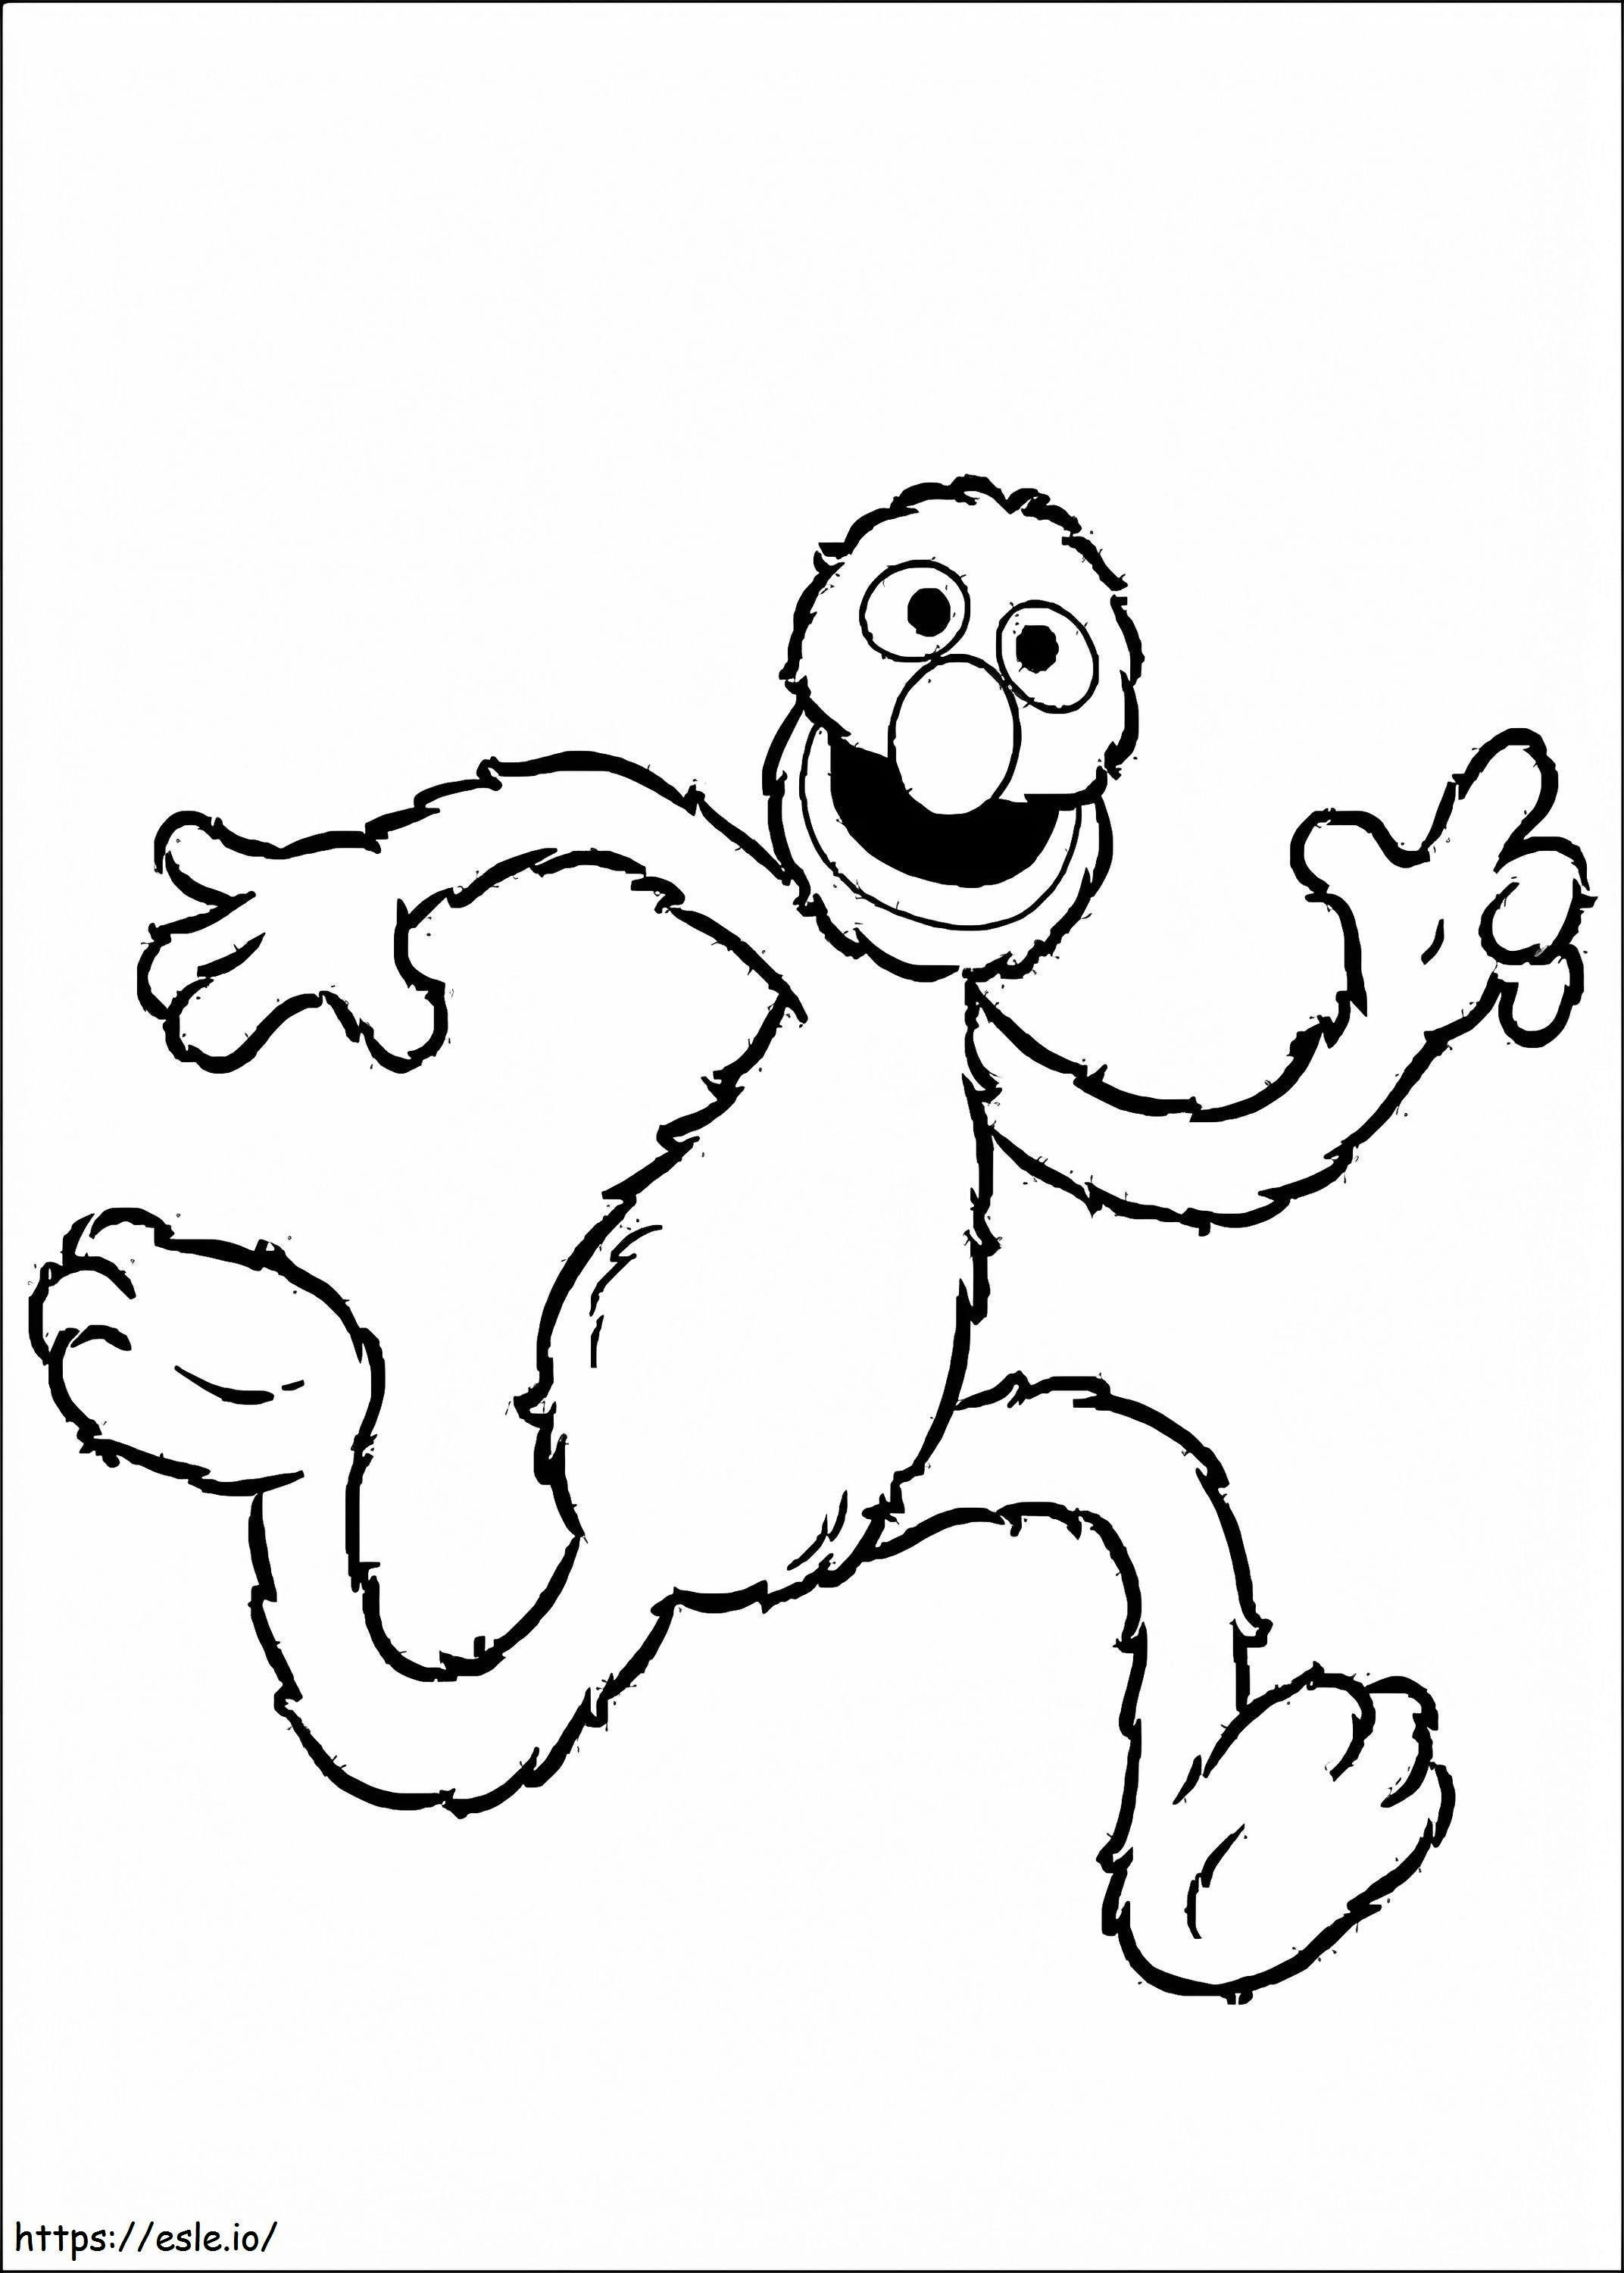 Grover Running coloring page